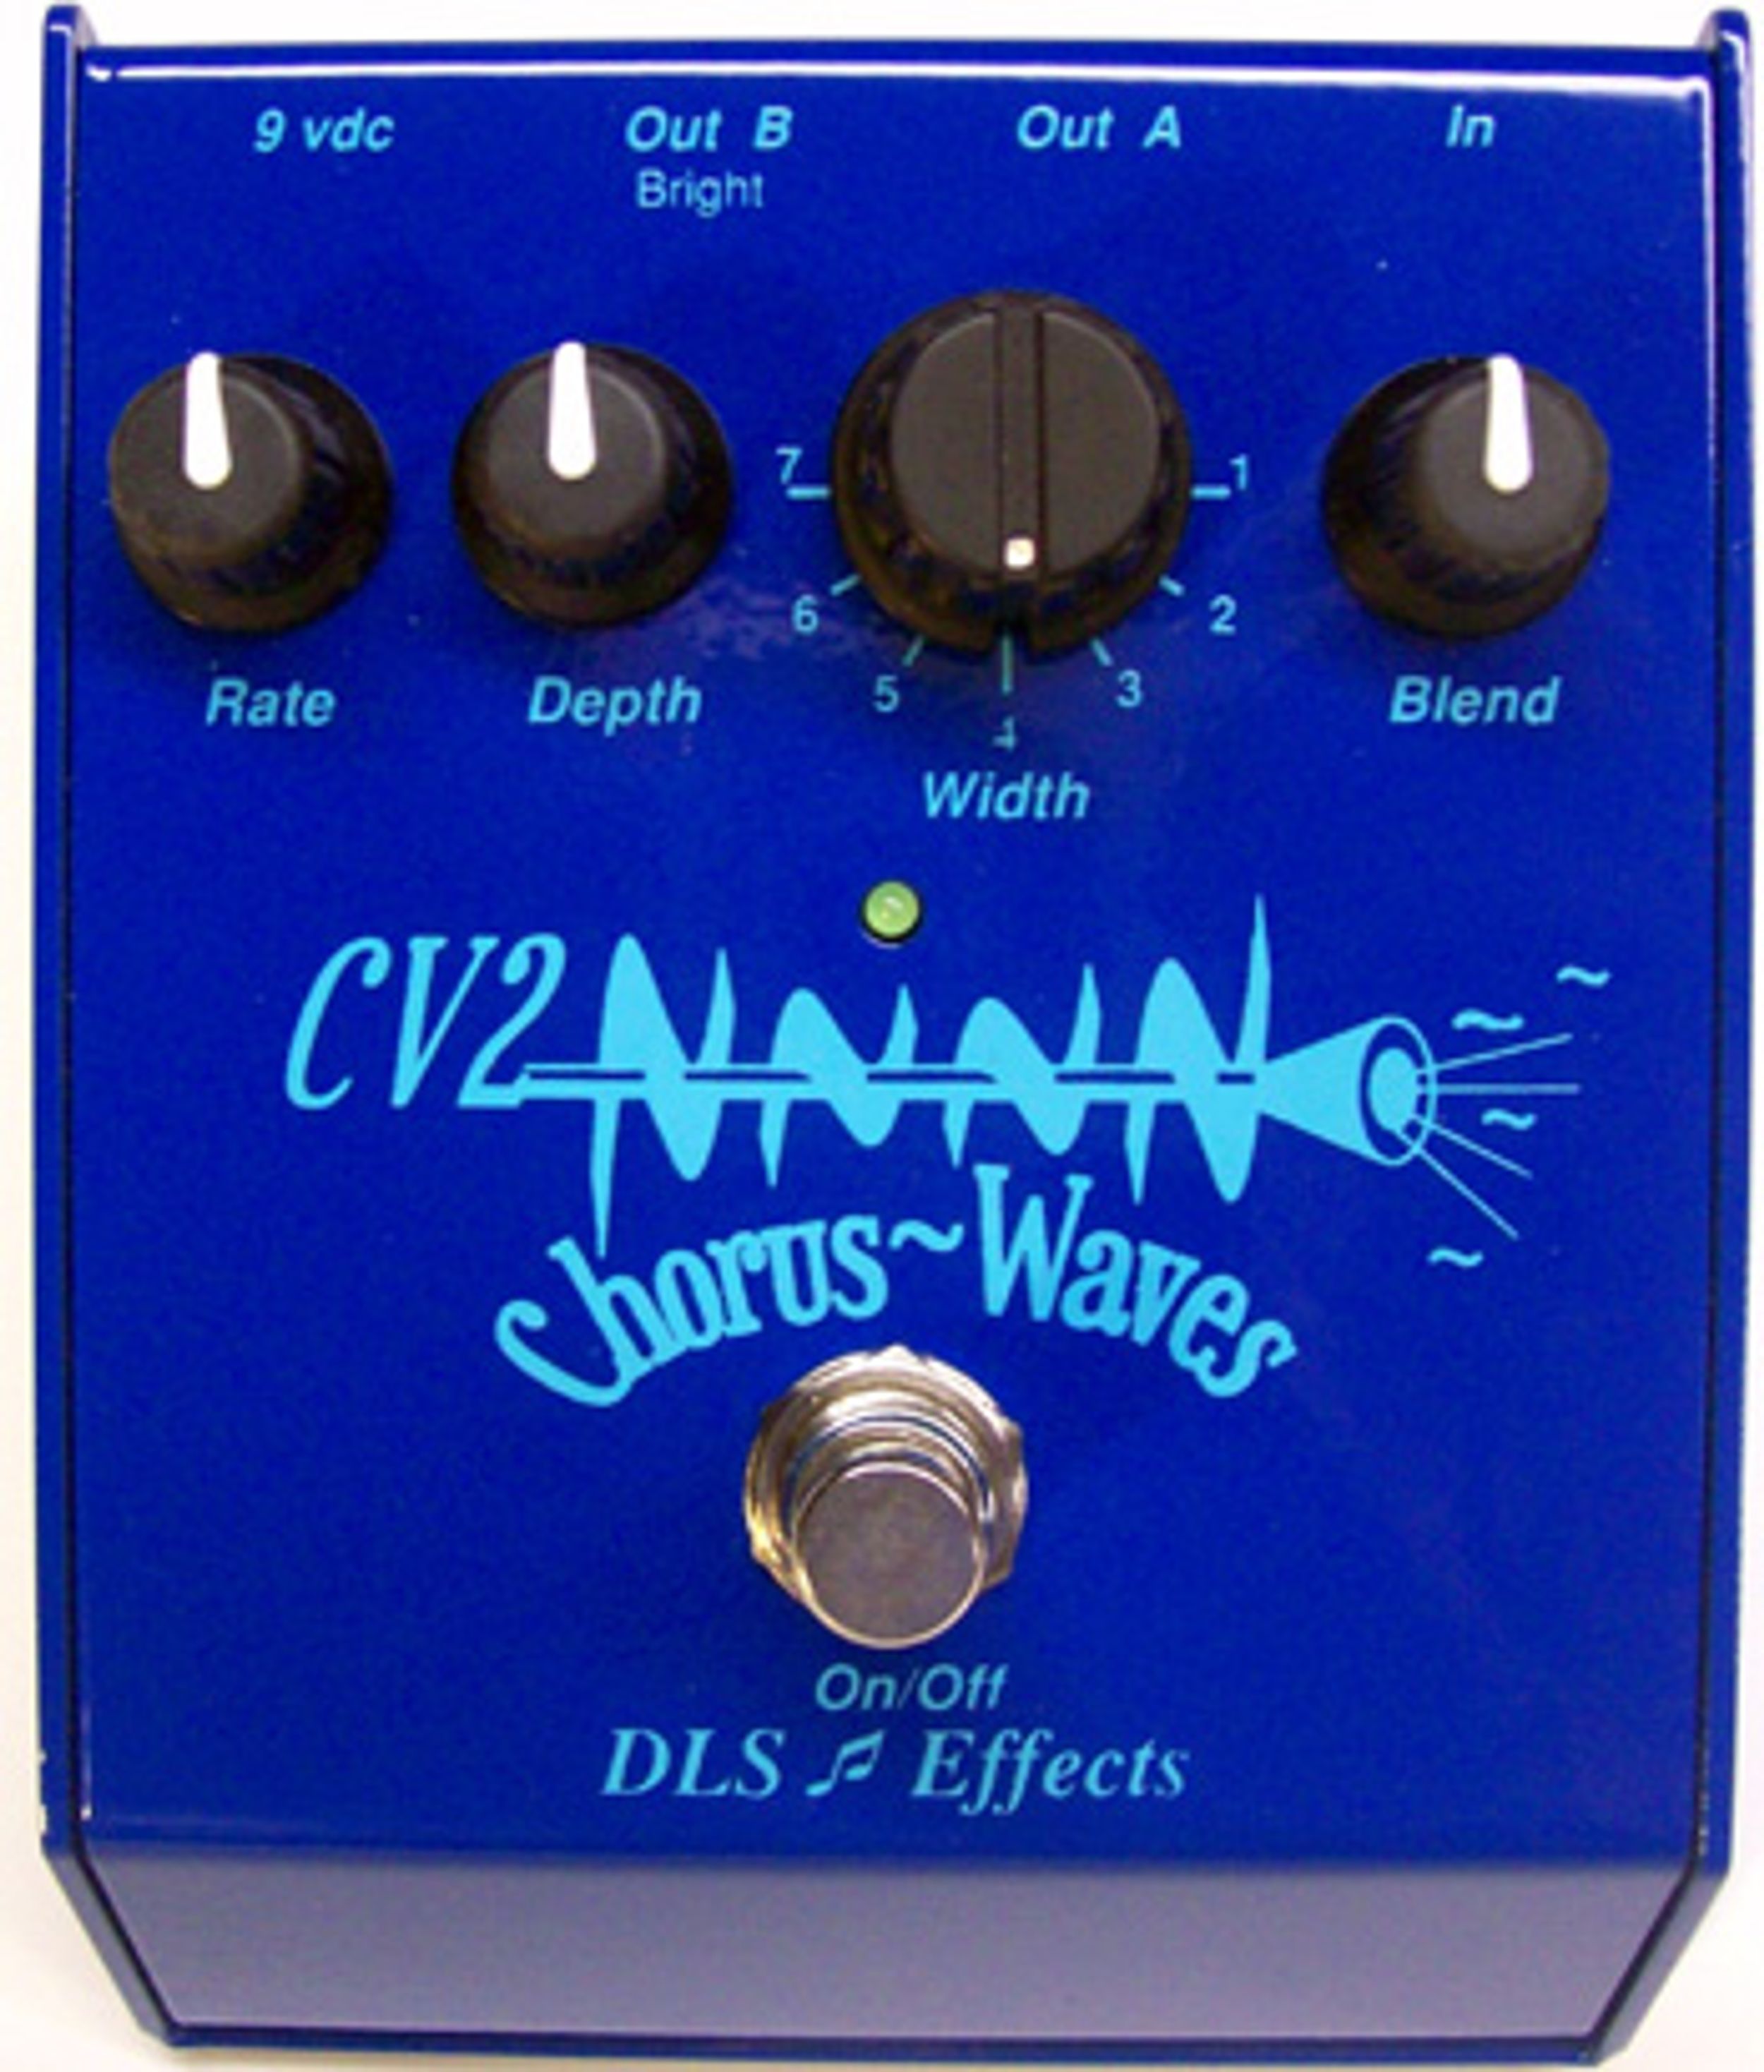 DLS Effects Releases Stereo Chorus Waves